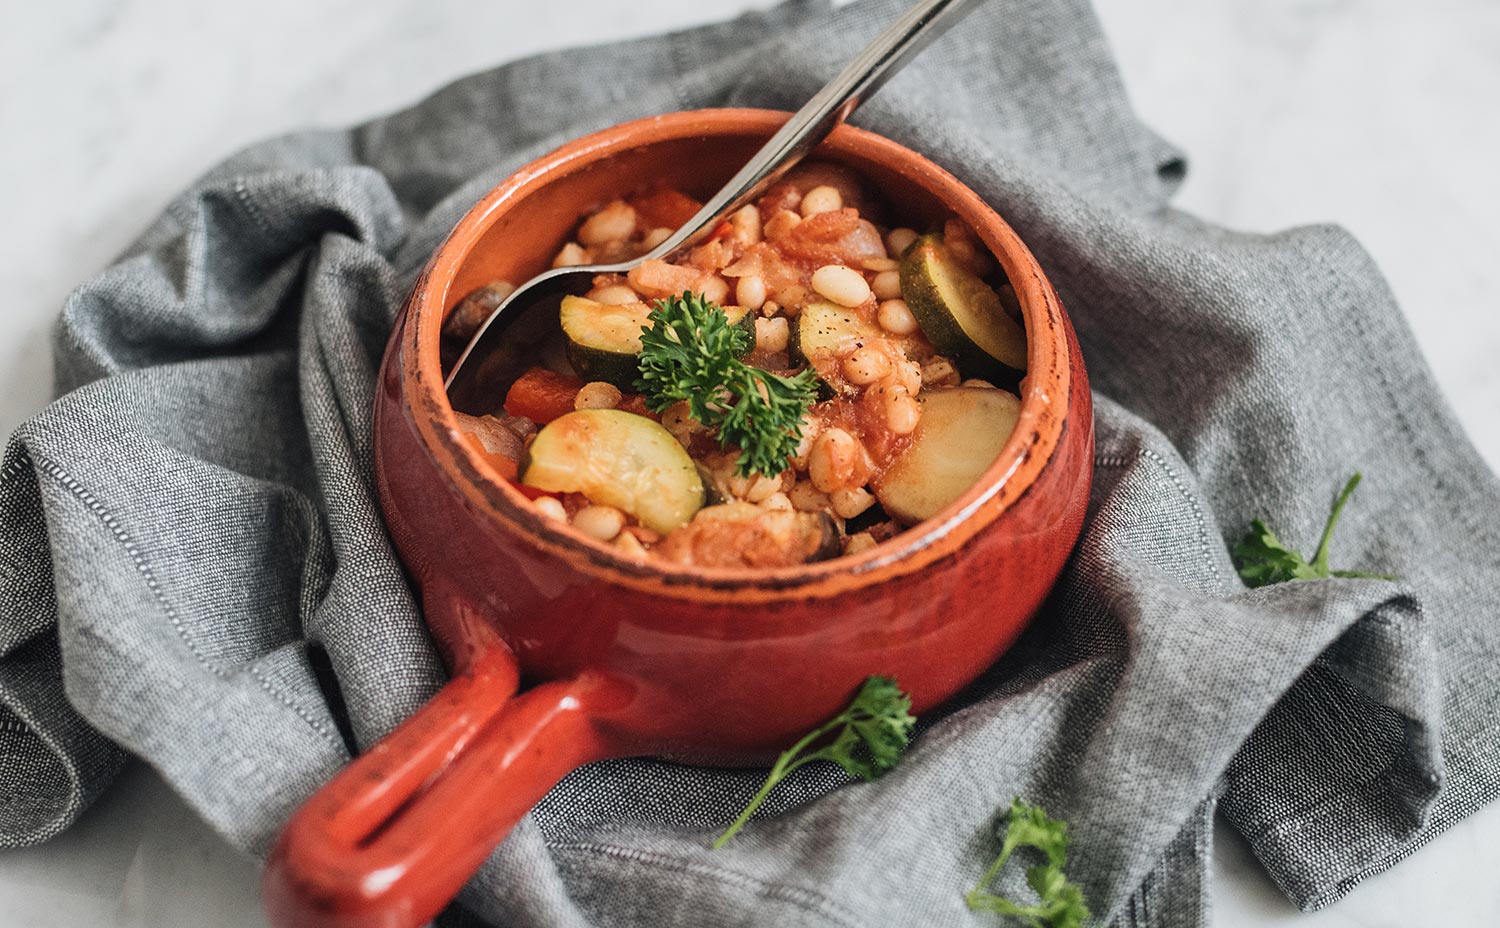 Oven Roasted Vegetable & Bean Stew